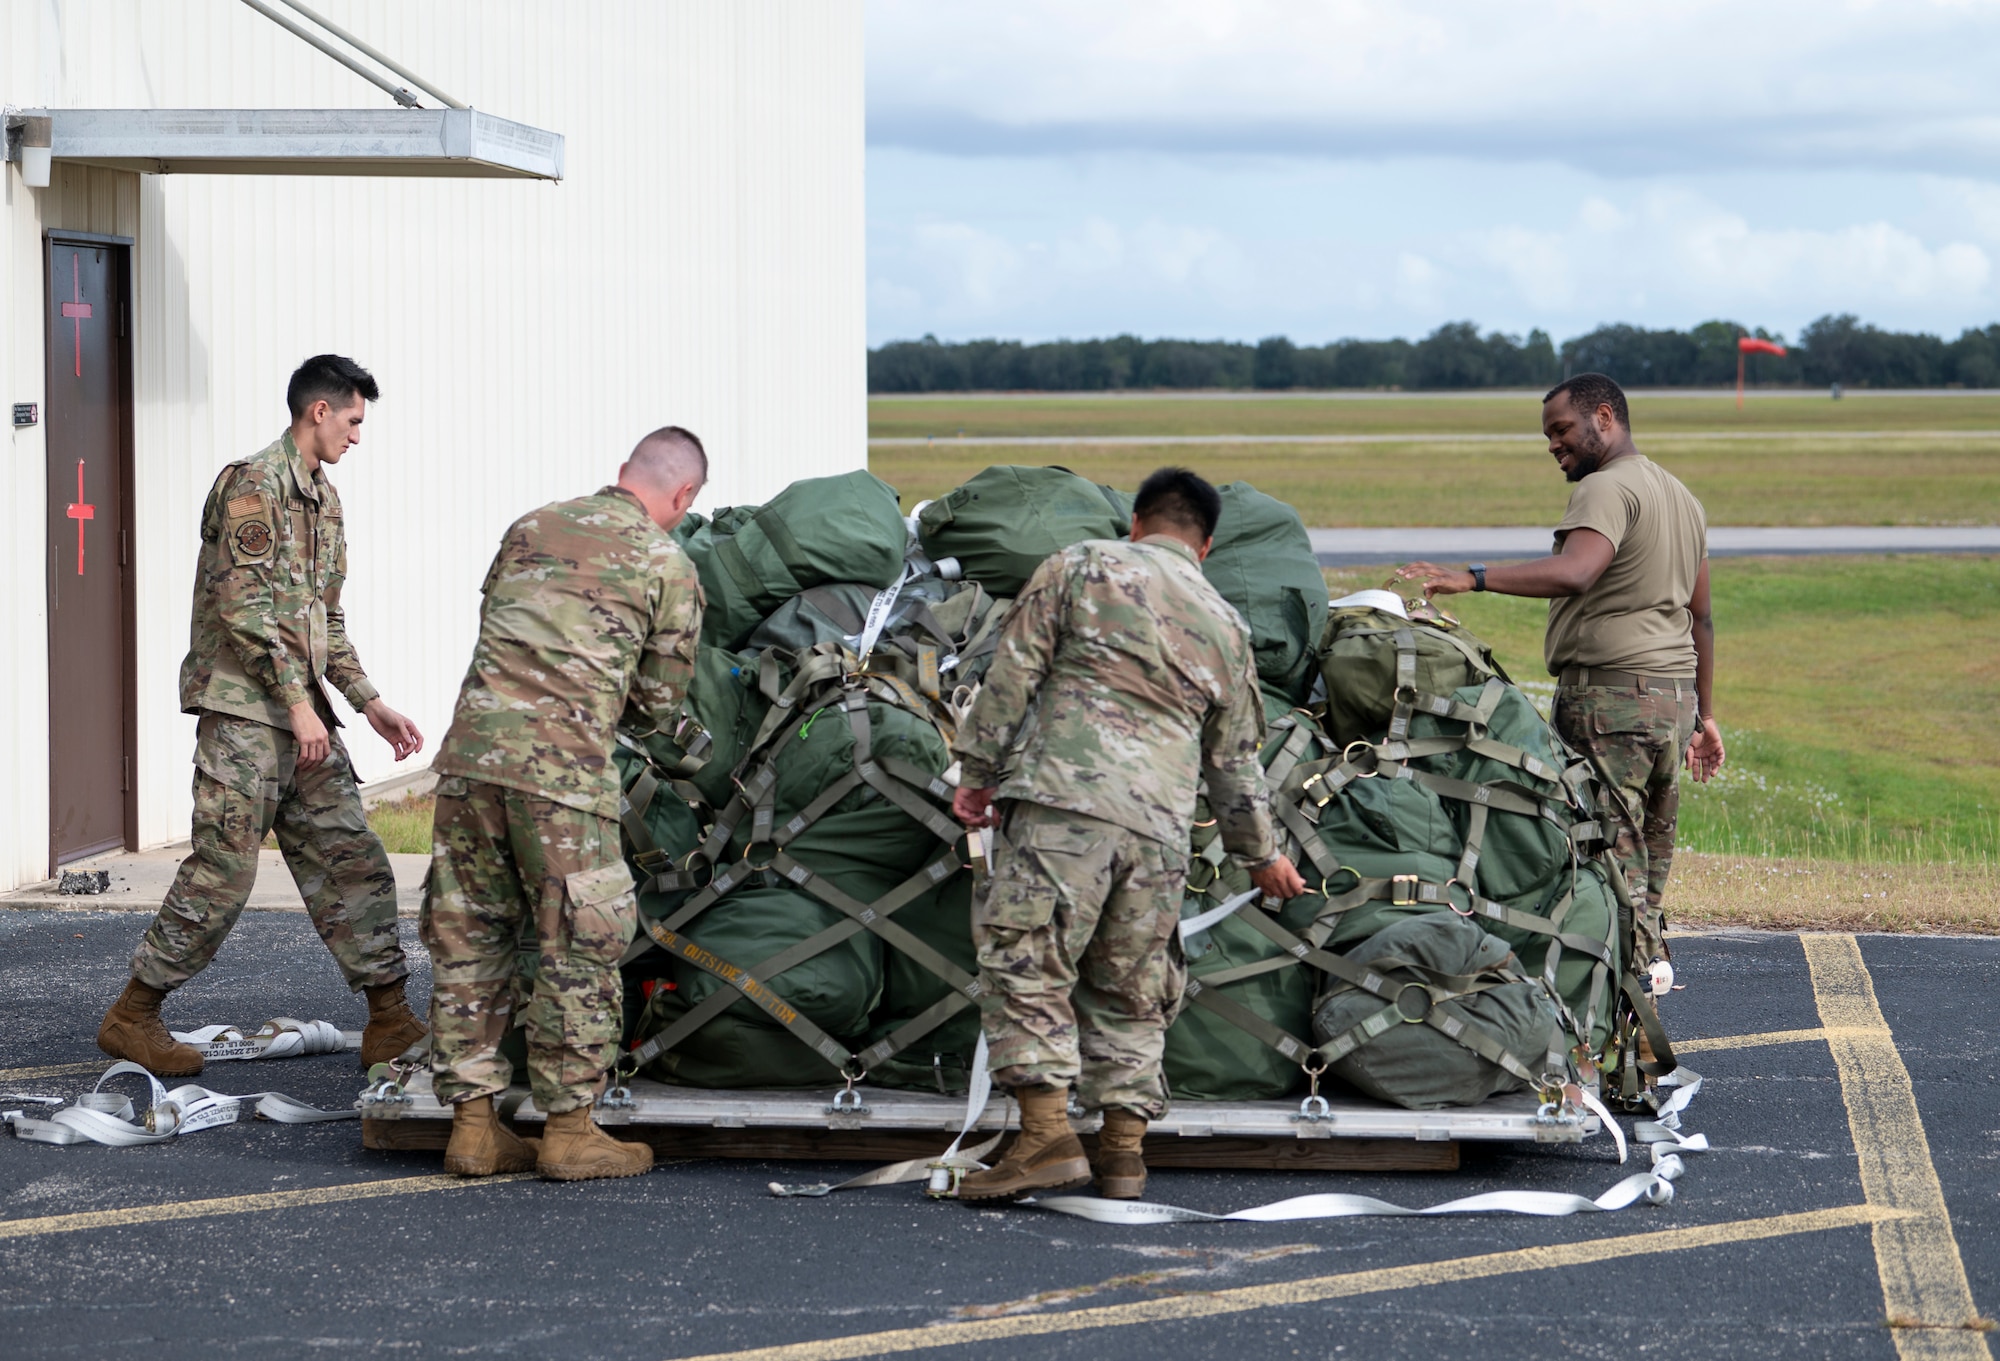 Mosaic Tiger 24-1 participants prepare to unload duffel bags at Avon Park Air Force Range, Florida, Nov. 13, 2023. Mosaic Tiger tests the ability, speed and efficiency of rapid mobility to project combat power. (U.S. Air Force photo by Airman 1st Class Leonid Soubbotine)